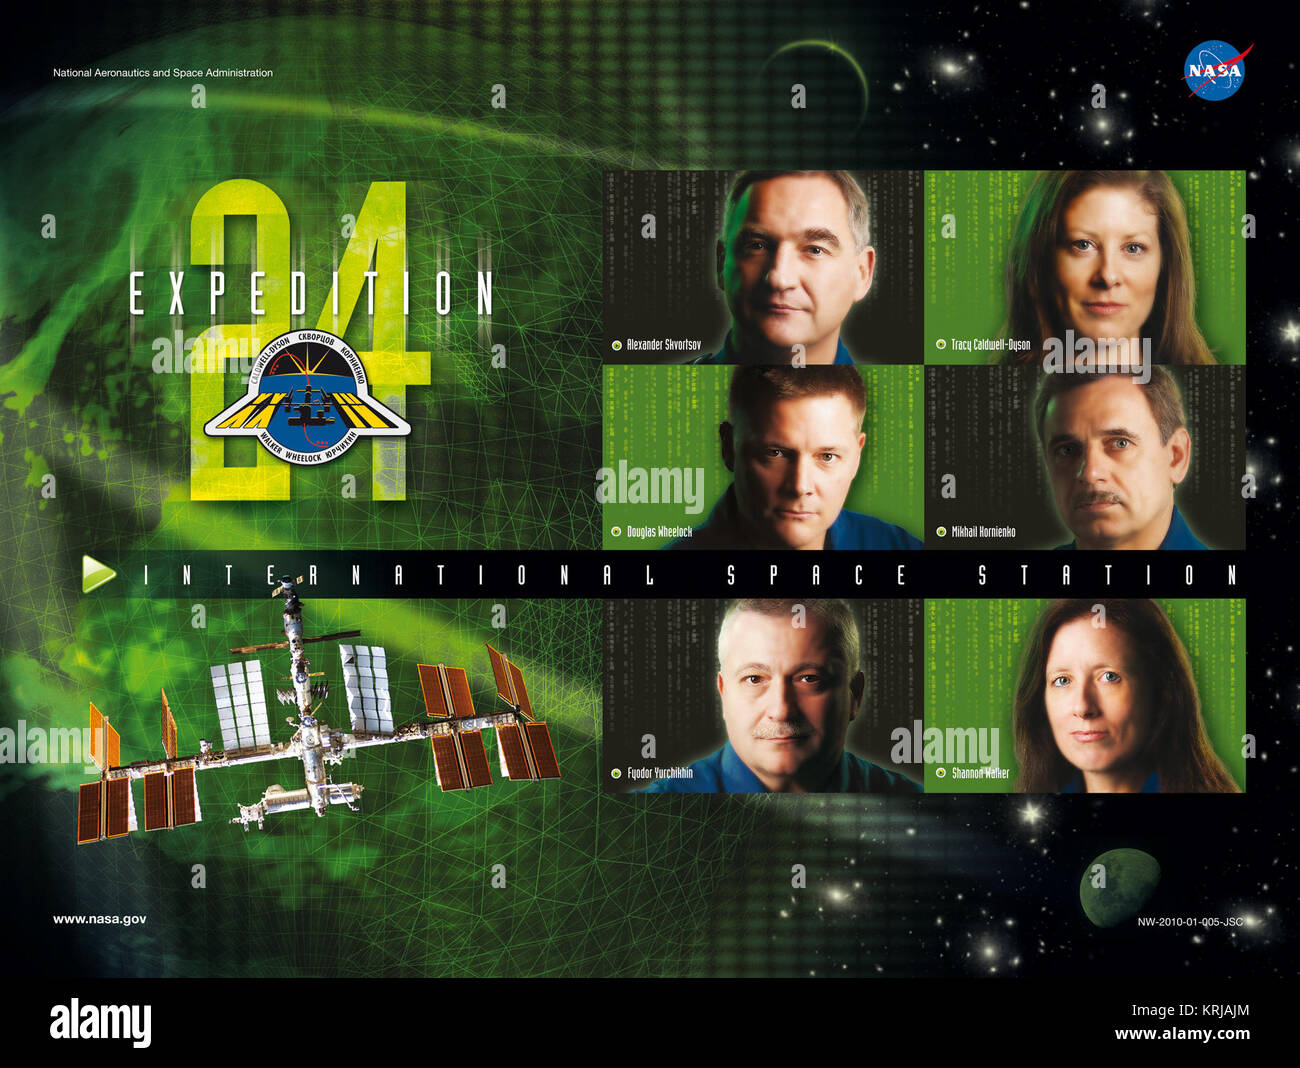 Expedition 24 crew poster Expedition 24 Matrix crew poster Stock Photo